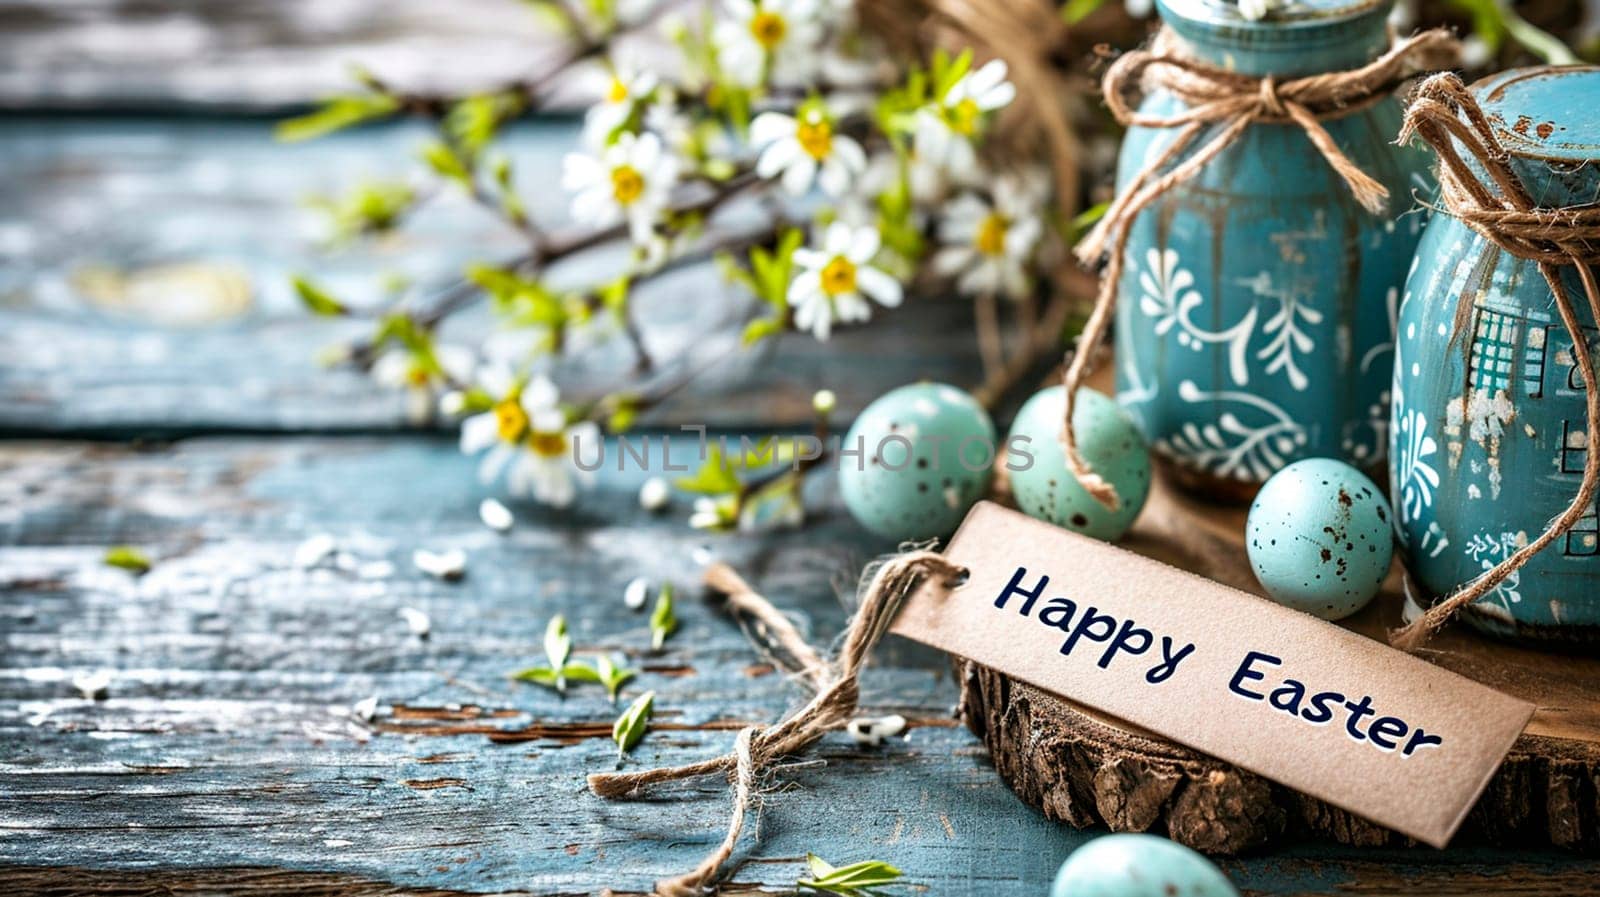 Happy Easter card and eggs. Selective focus. Nature.